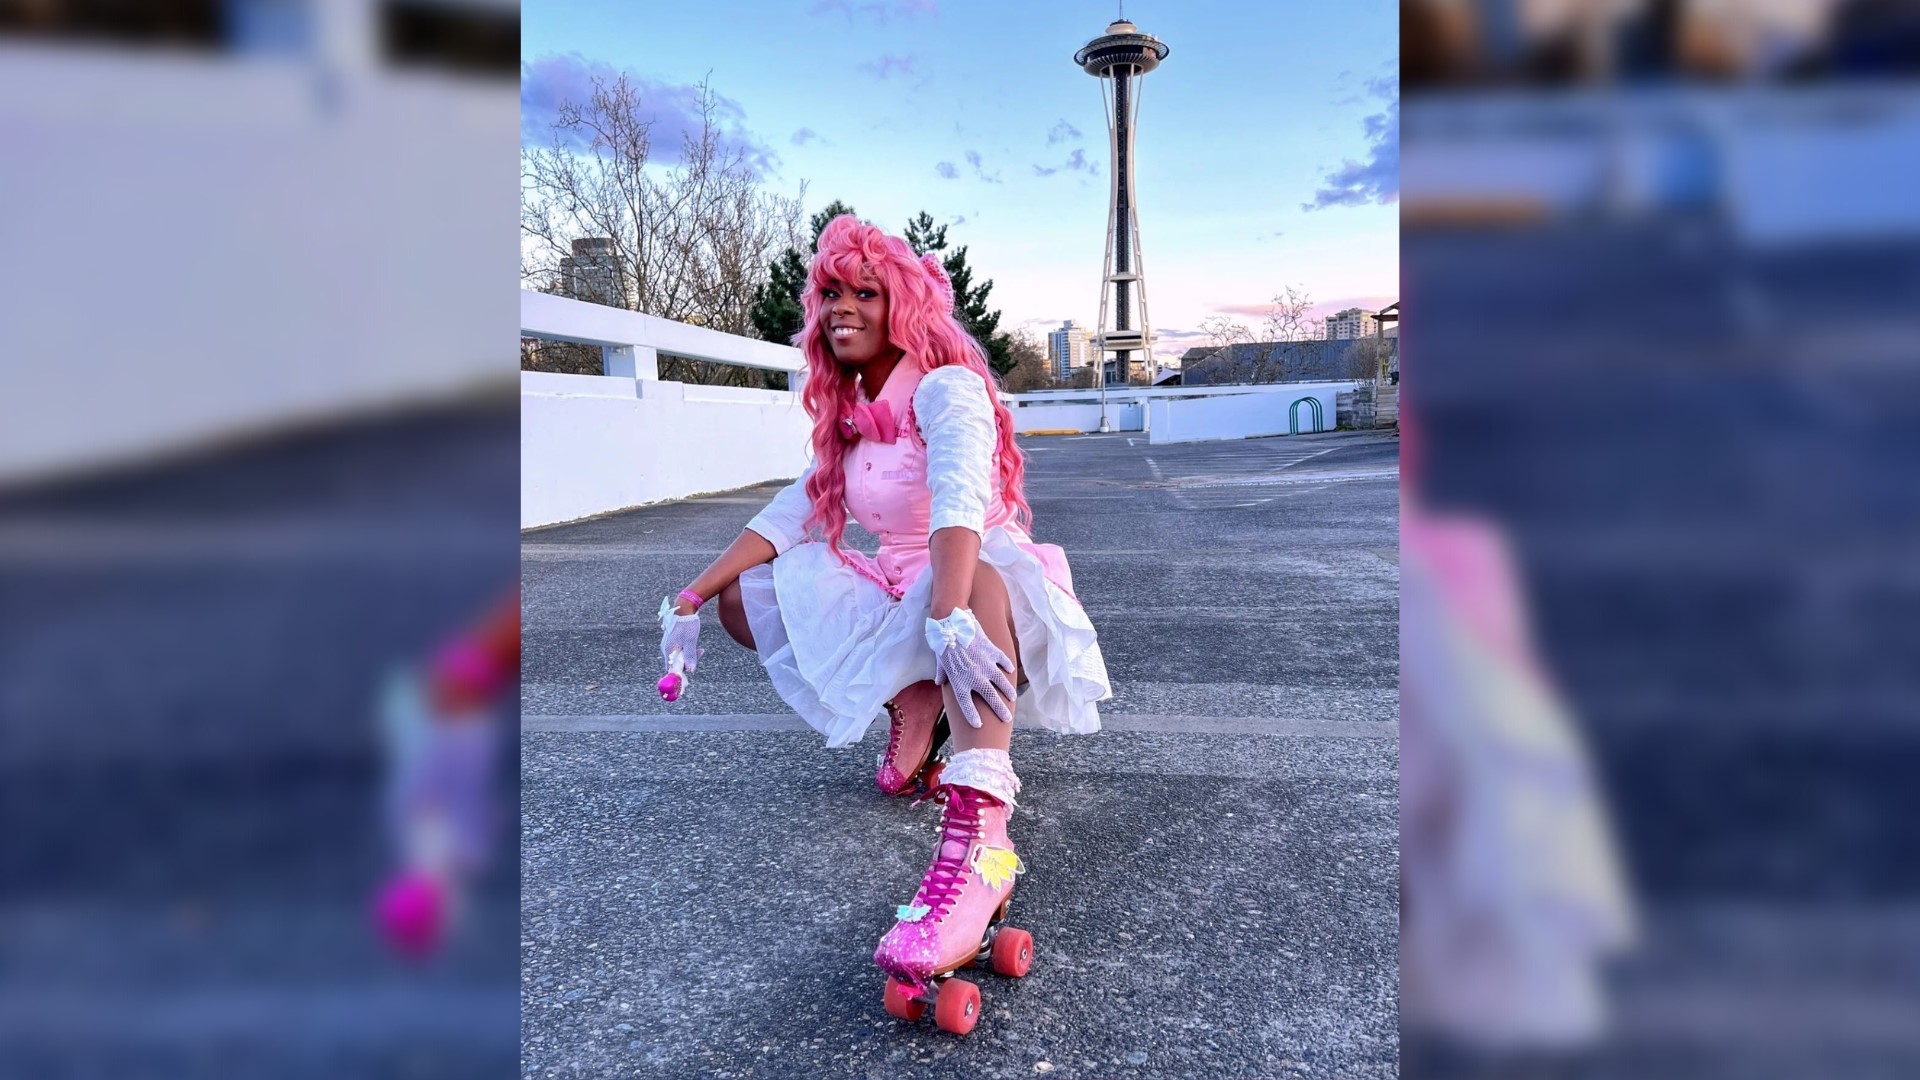 Miracle Sepulveda says skating outside helped her get through the pandemic. #k5evening